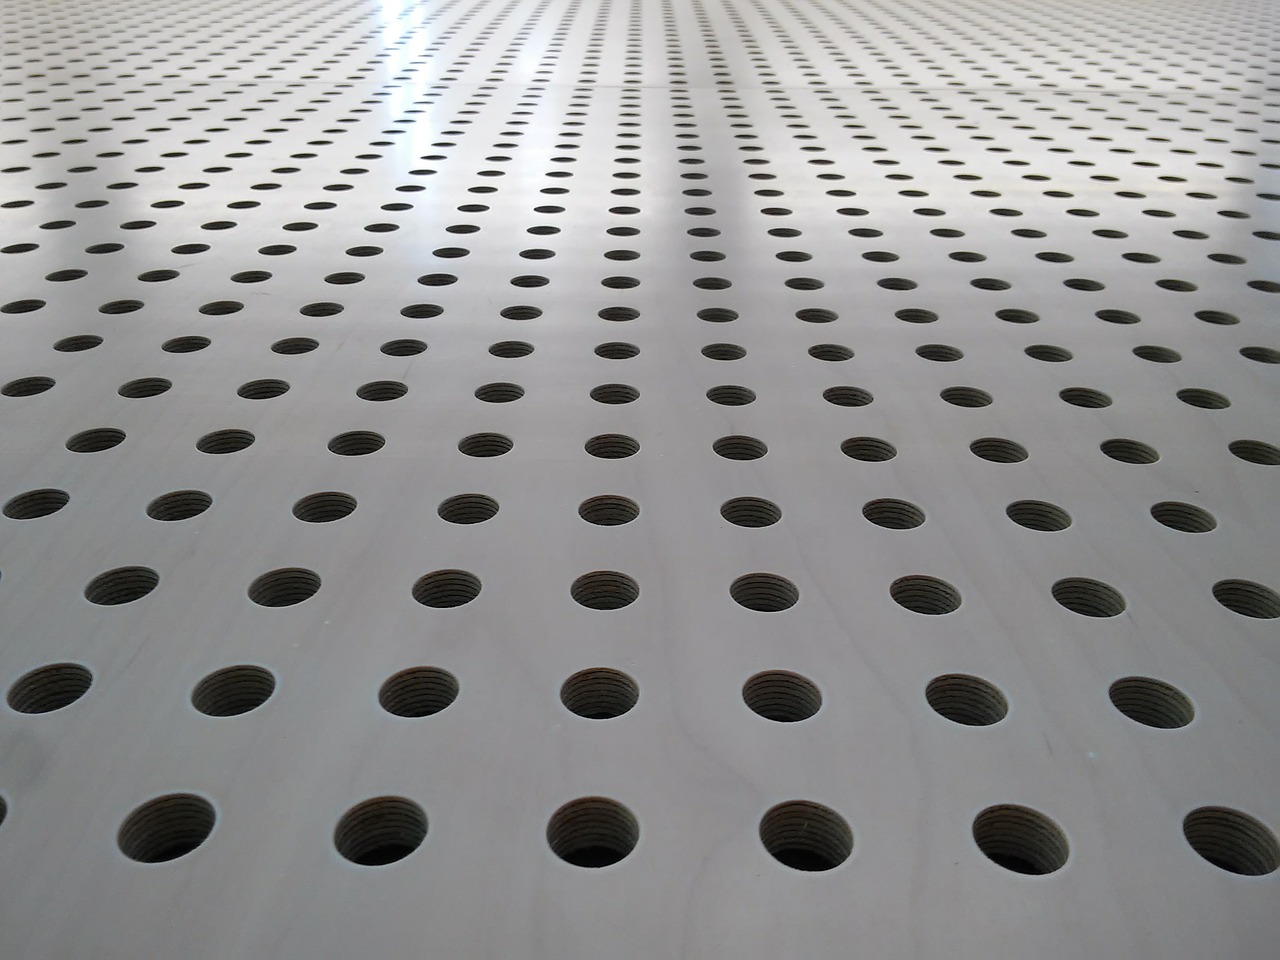 holes pattern perspective free photo